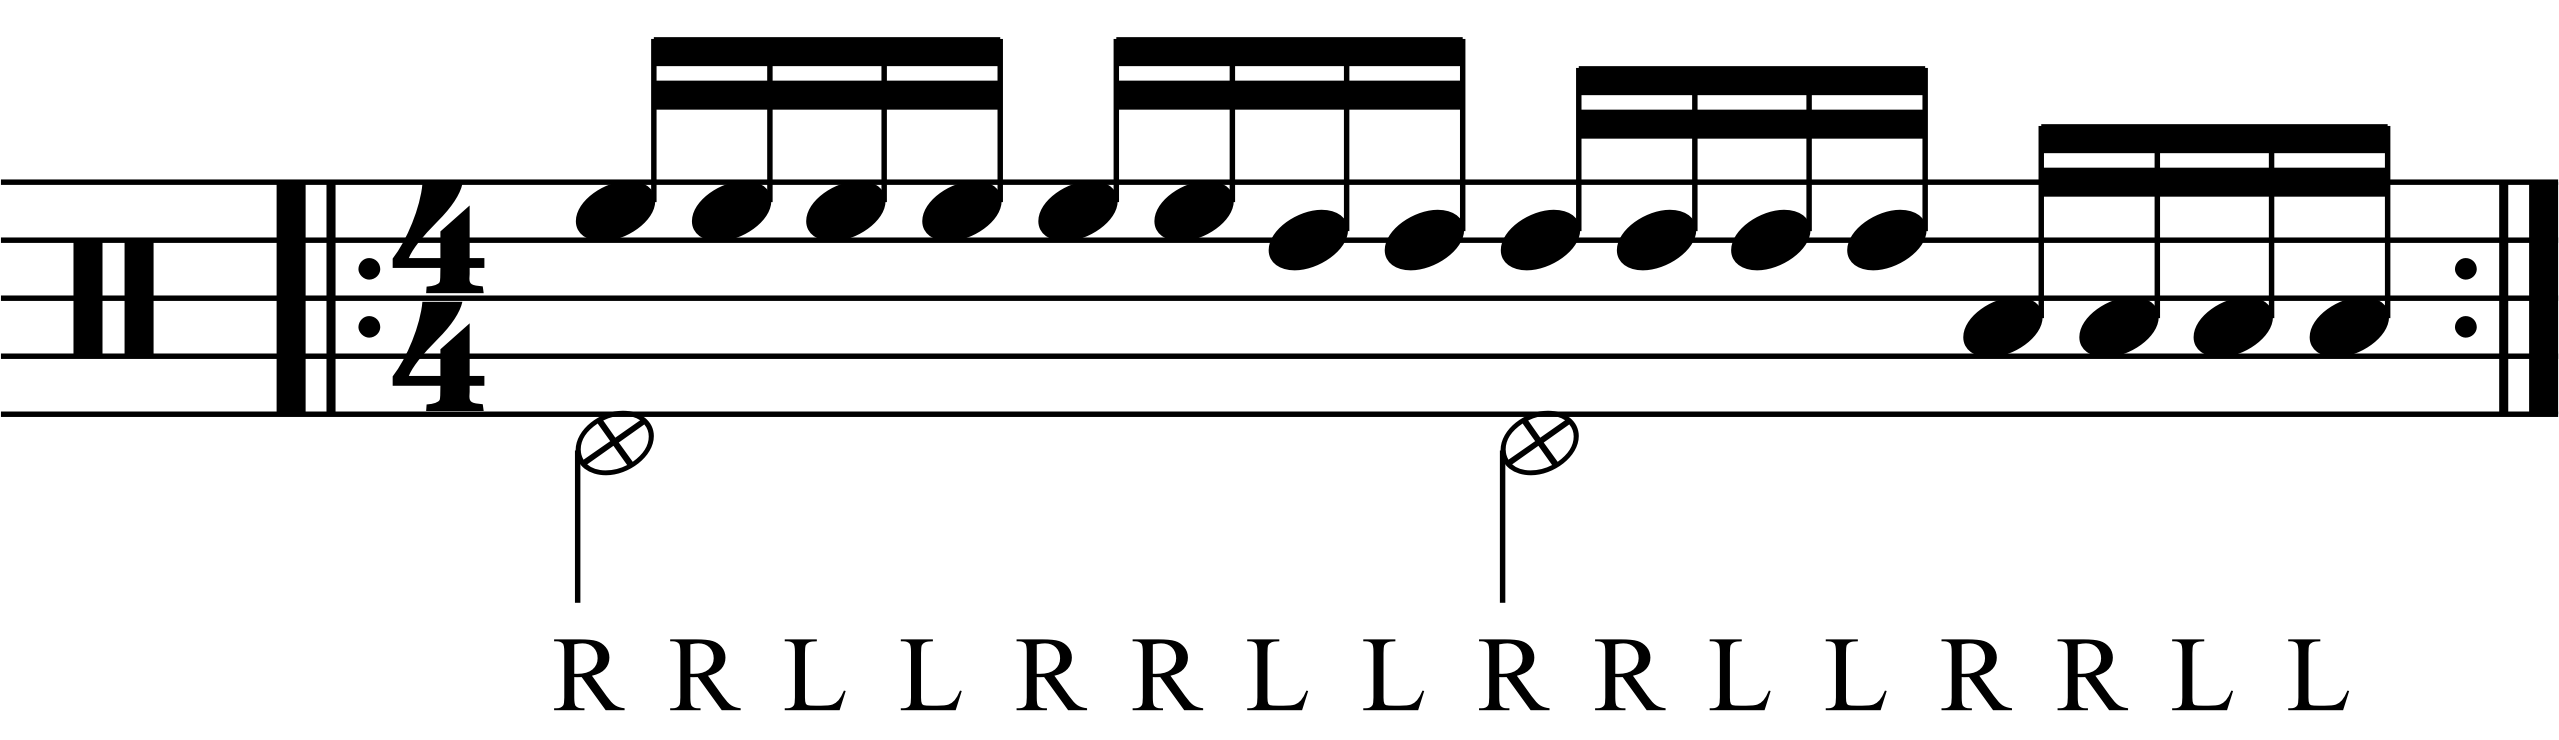 An orchestrated double stroke roll